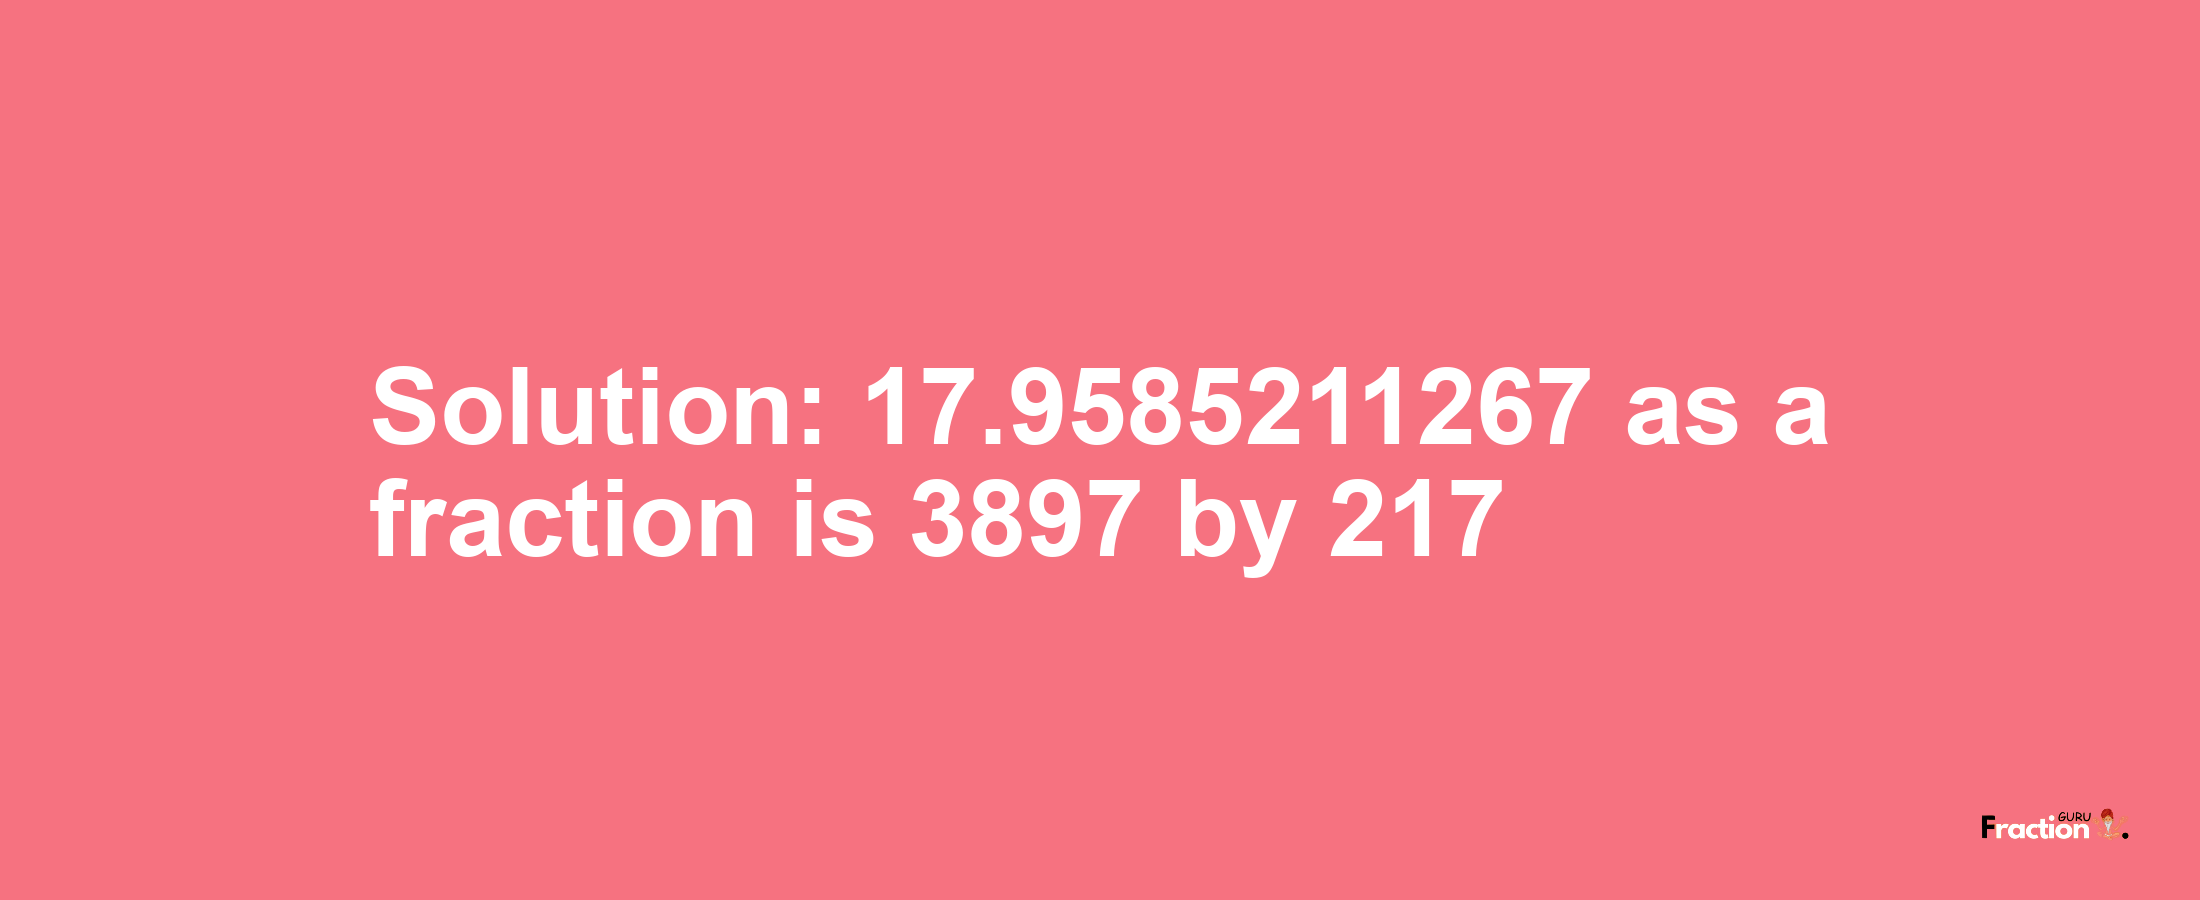 Solution:17.9585211267 as a fraction is 3897/217